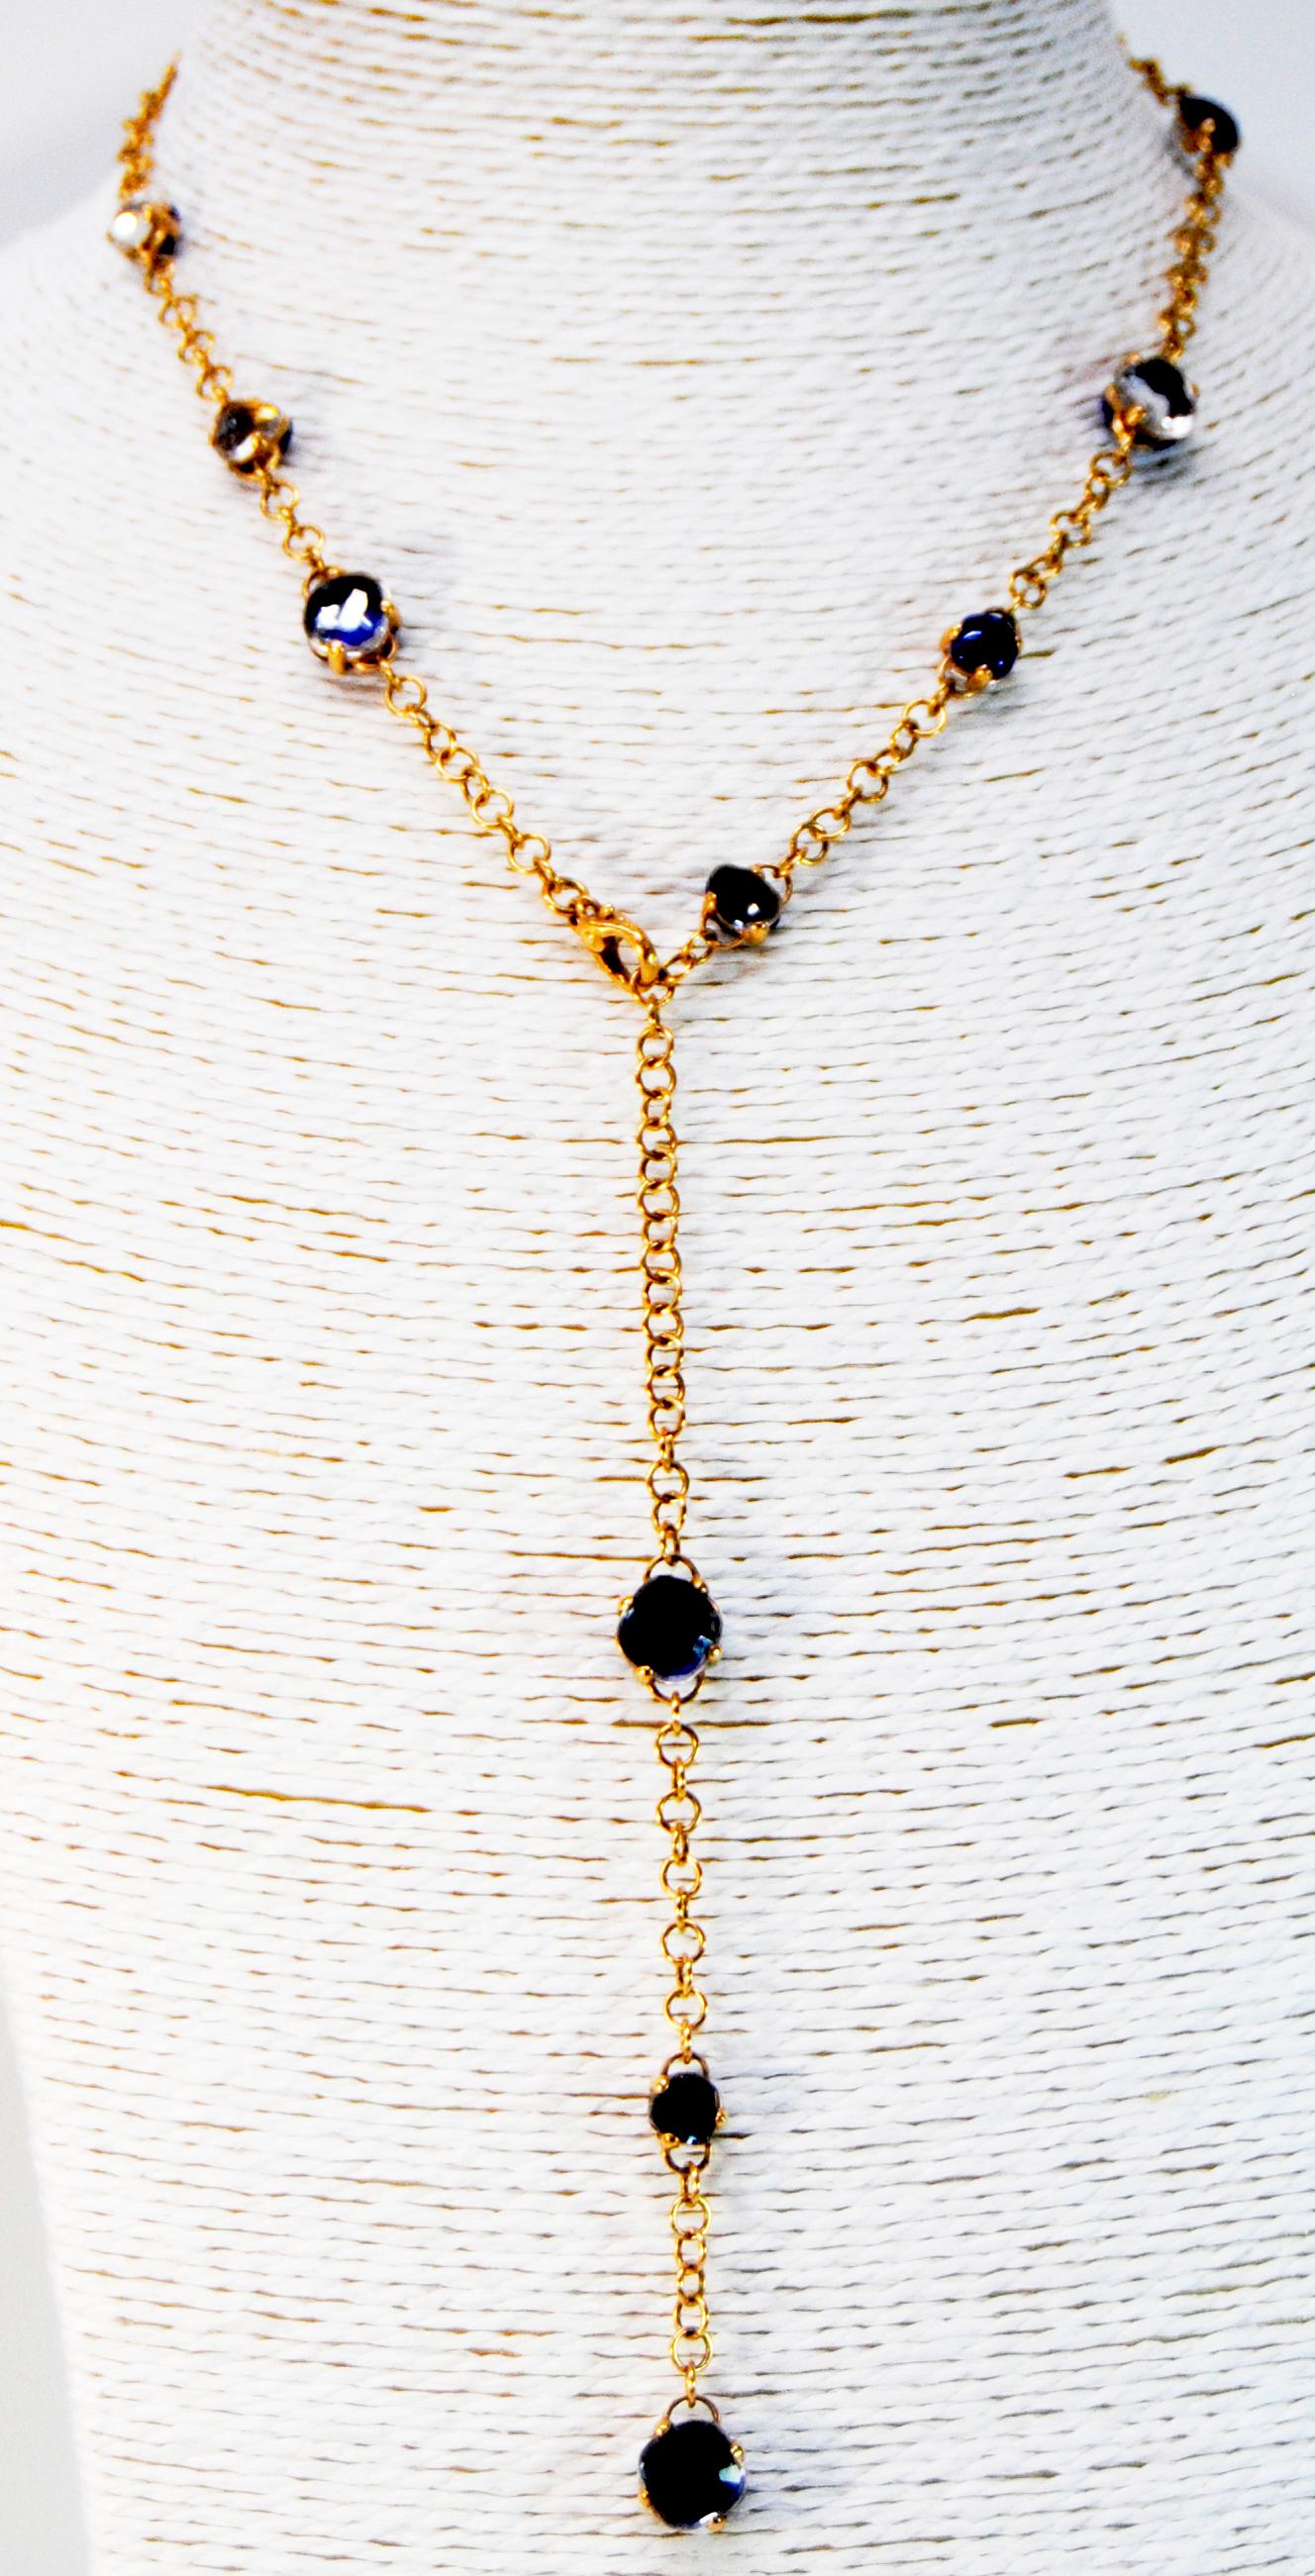 Inspired by the Mediterranean's crystal-clear water and luscious landscape, the smooth, rounded shapes in lapislazuli and rock crystal  multipurpose necklace inspires the Dolce Vita and the summer cruises around the Mediterranean 
Synonymous with